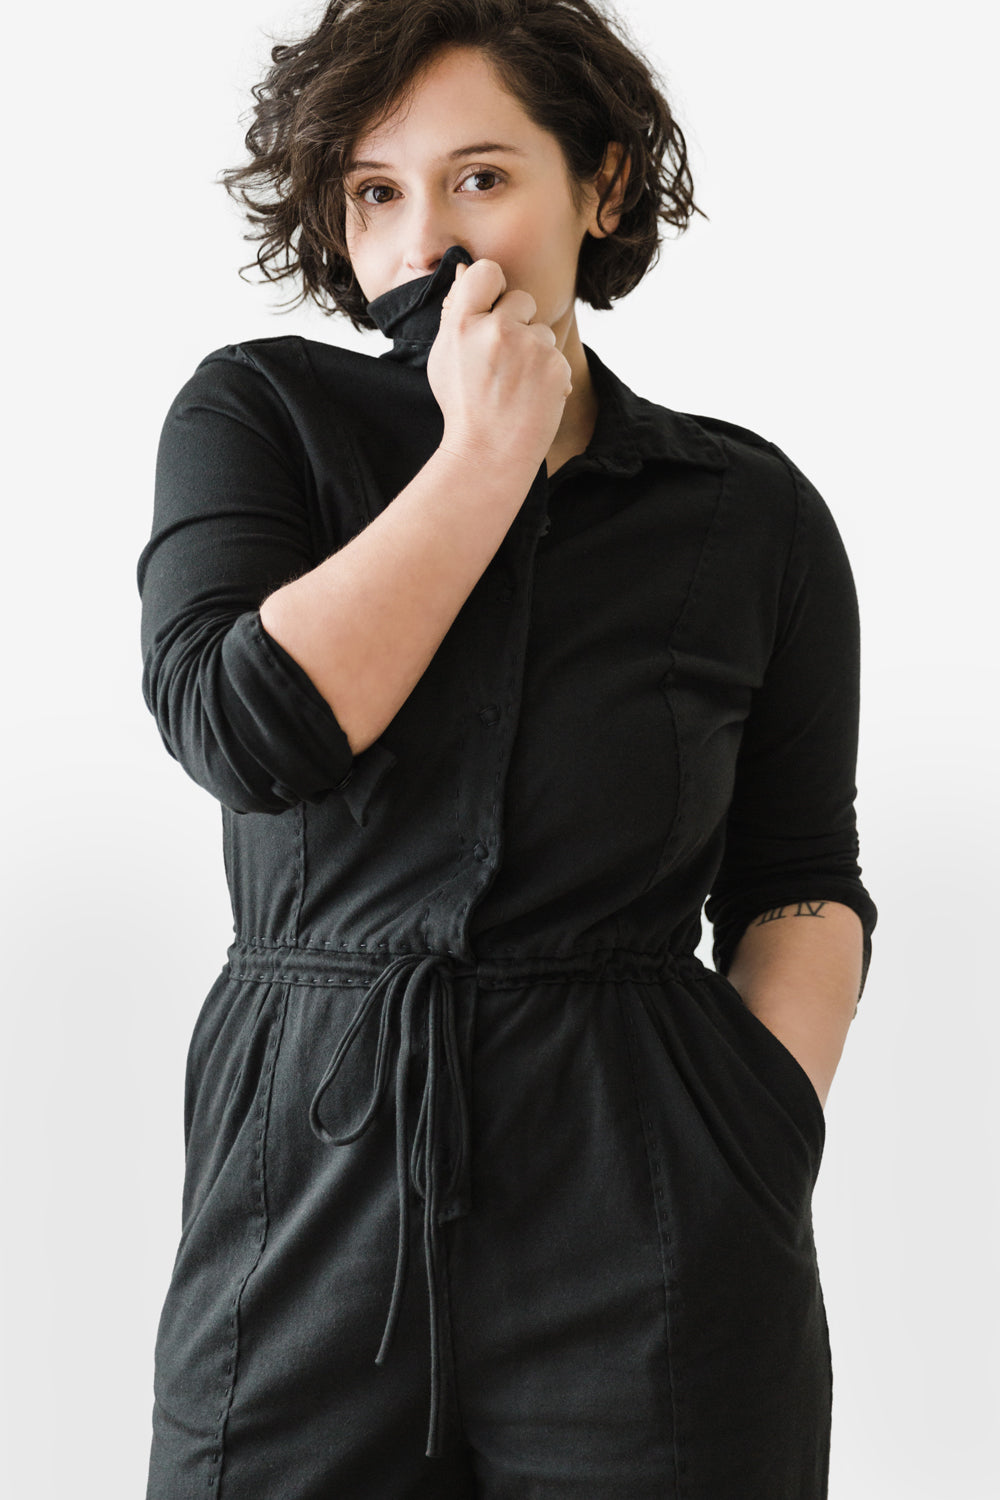 The School of Making Jumpsuit Kit in black. Made with 100% organic cotton. Styled on model.